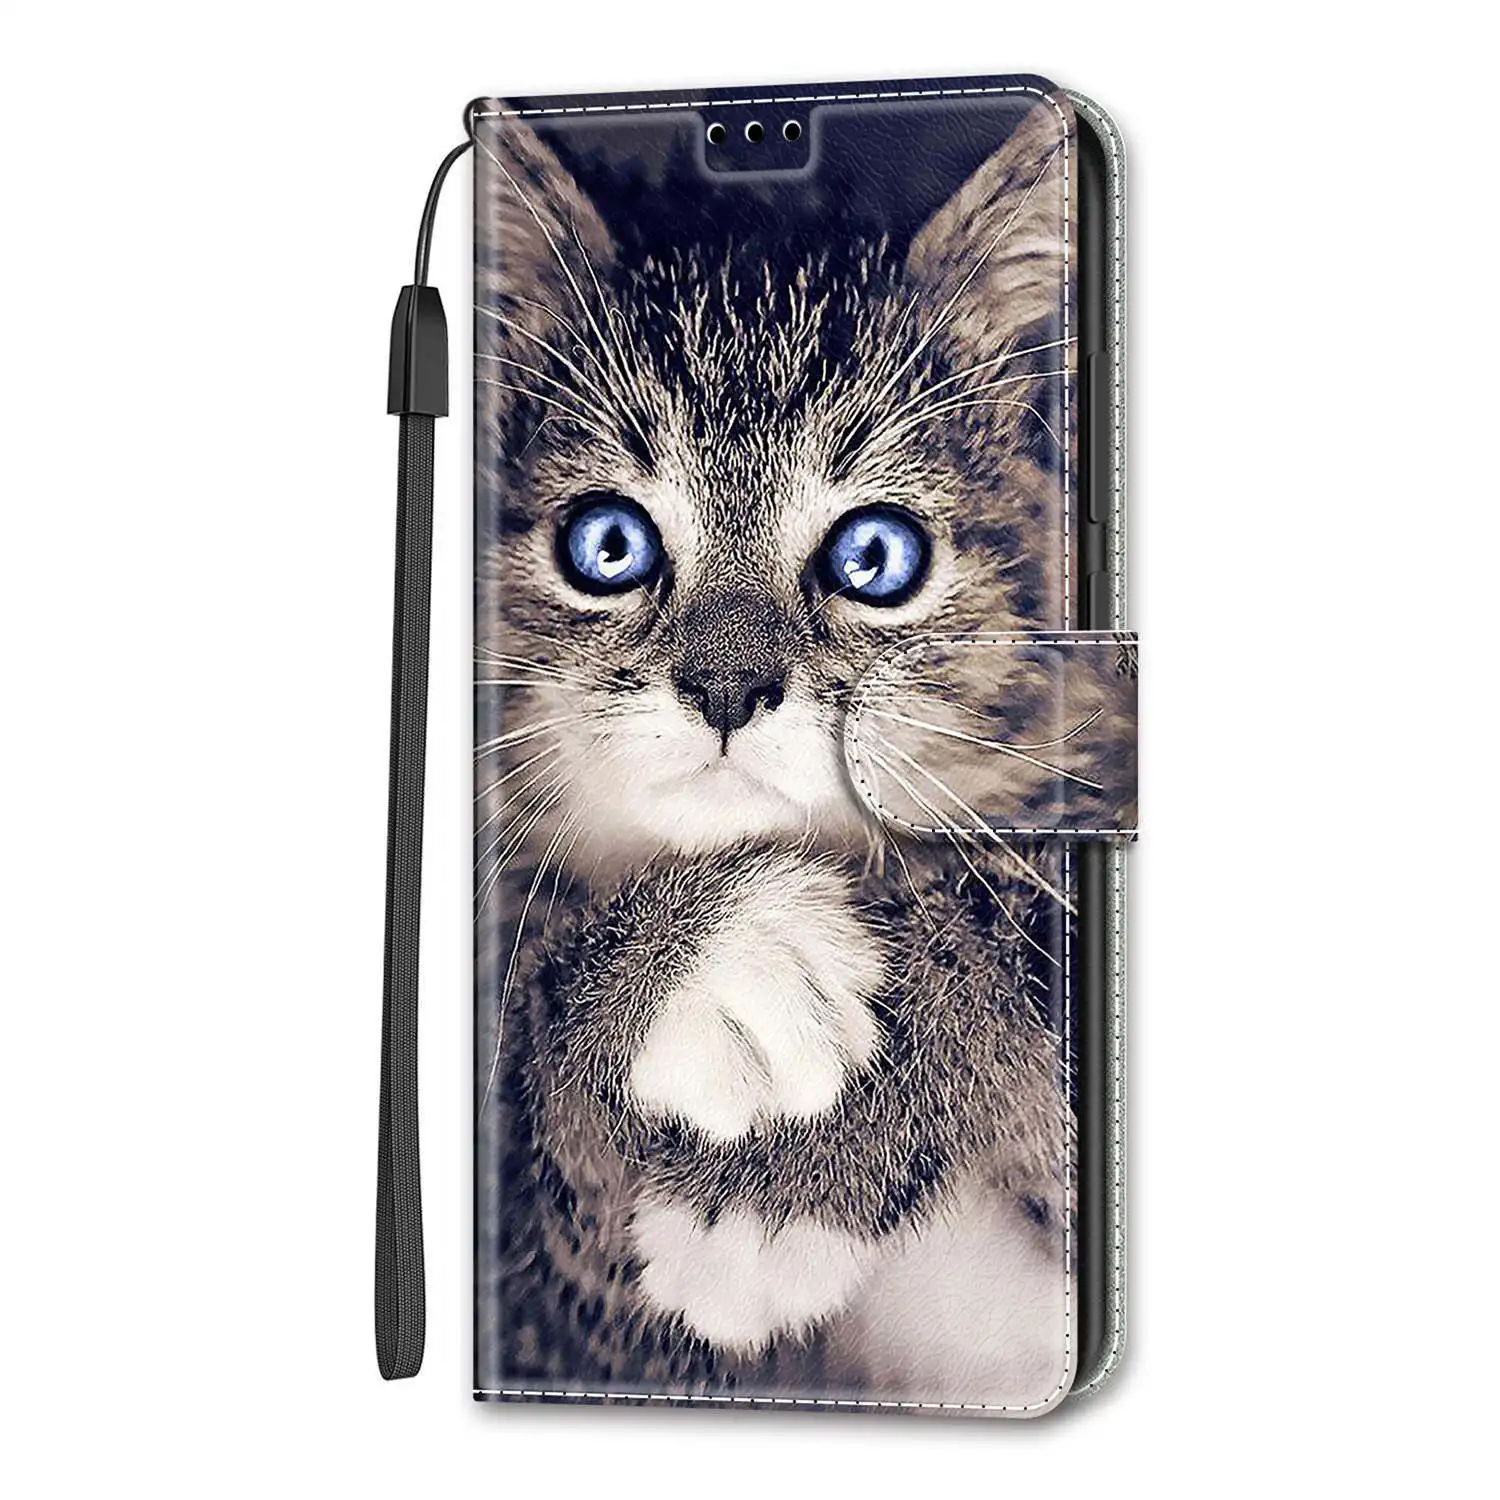 Etui Flip Leather Phone Case For OPPO A53 A53S A73 A93 A93S A54 A74 A94 4G 5G Fasion Girl Wallet Card Holder Stand Book Cover oppo phone back cover